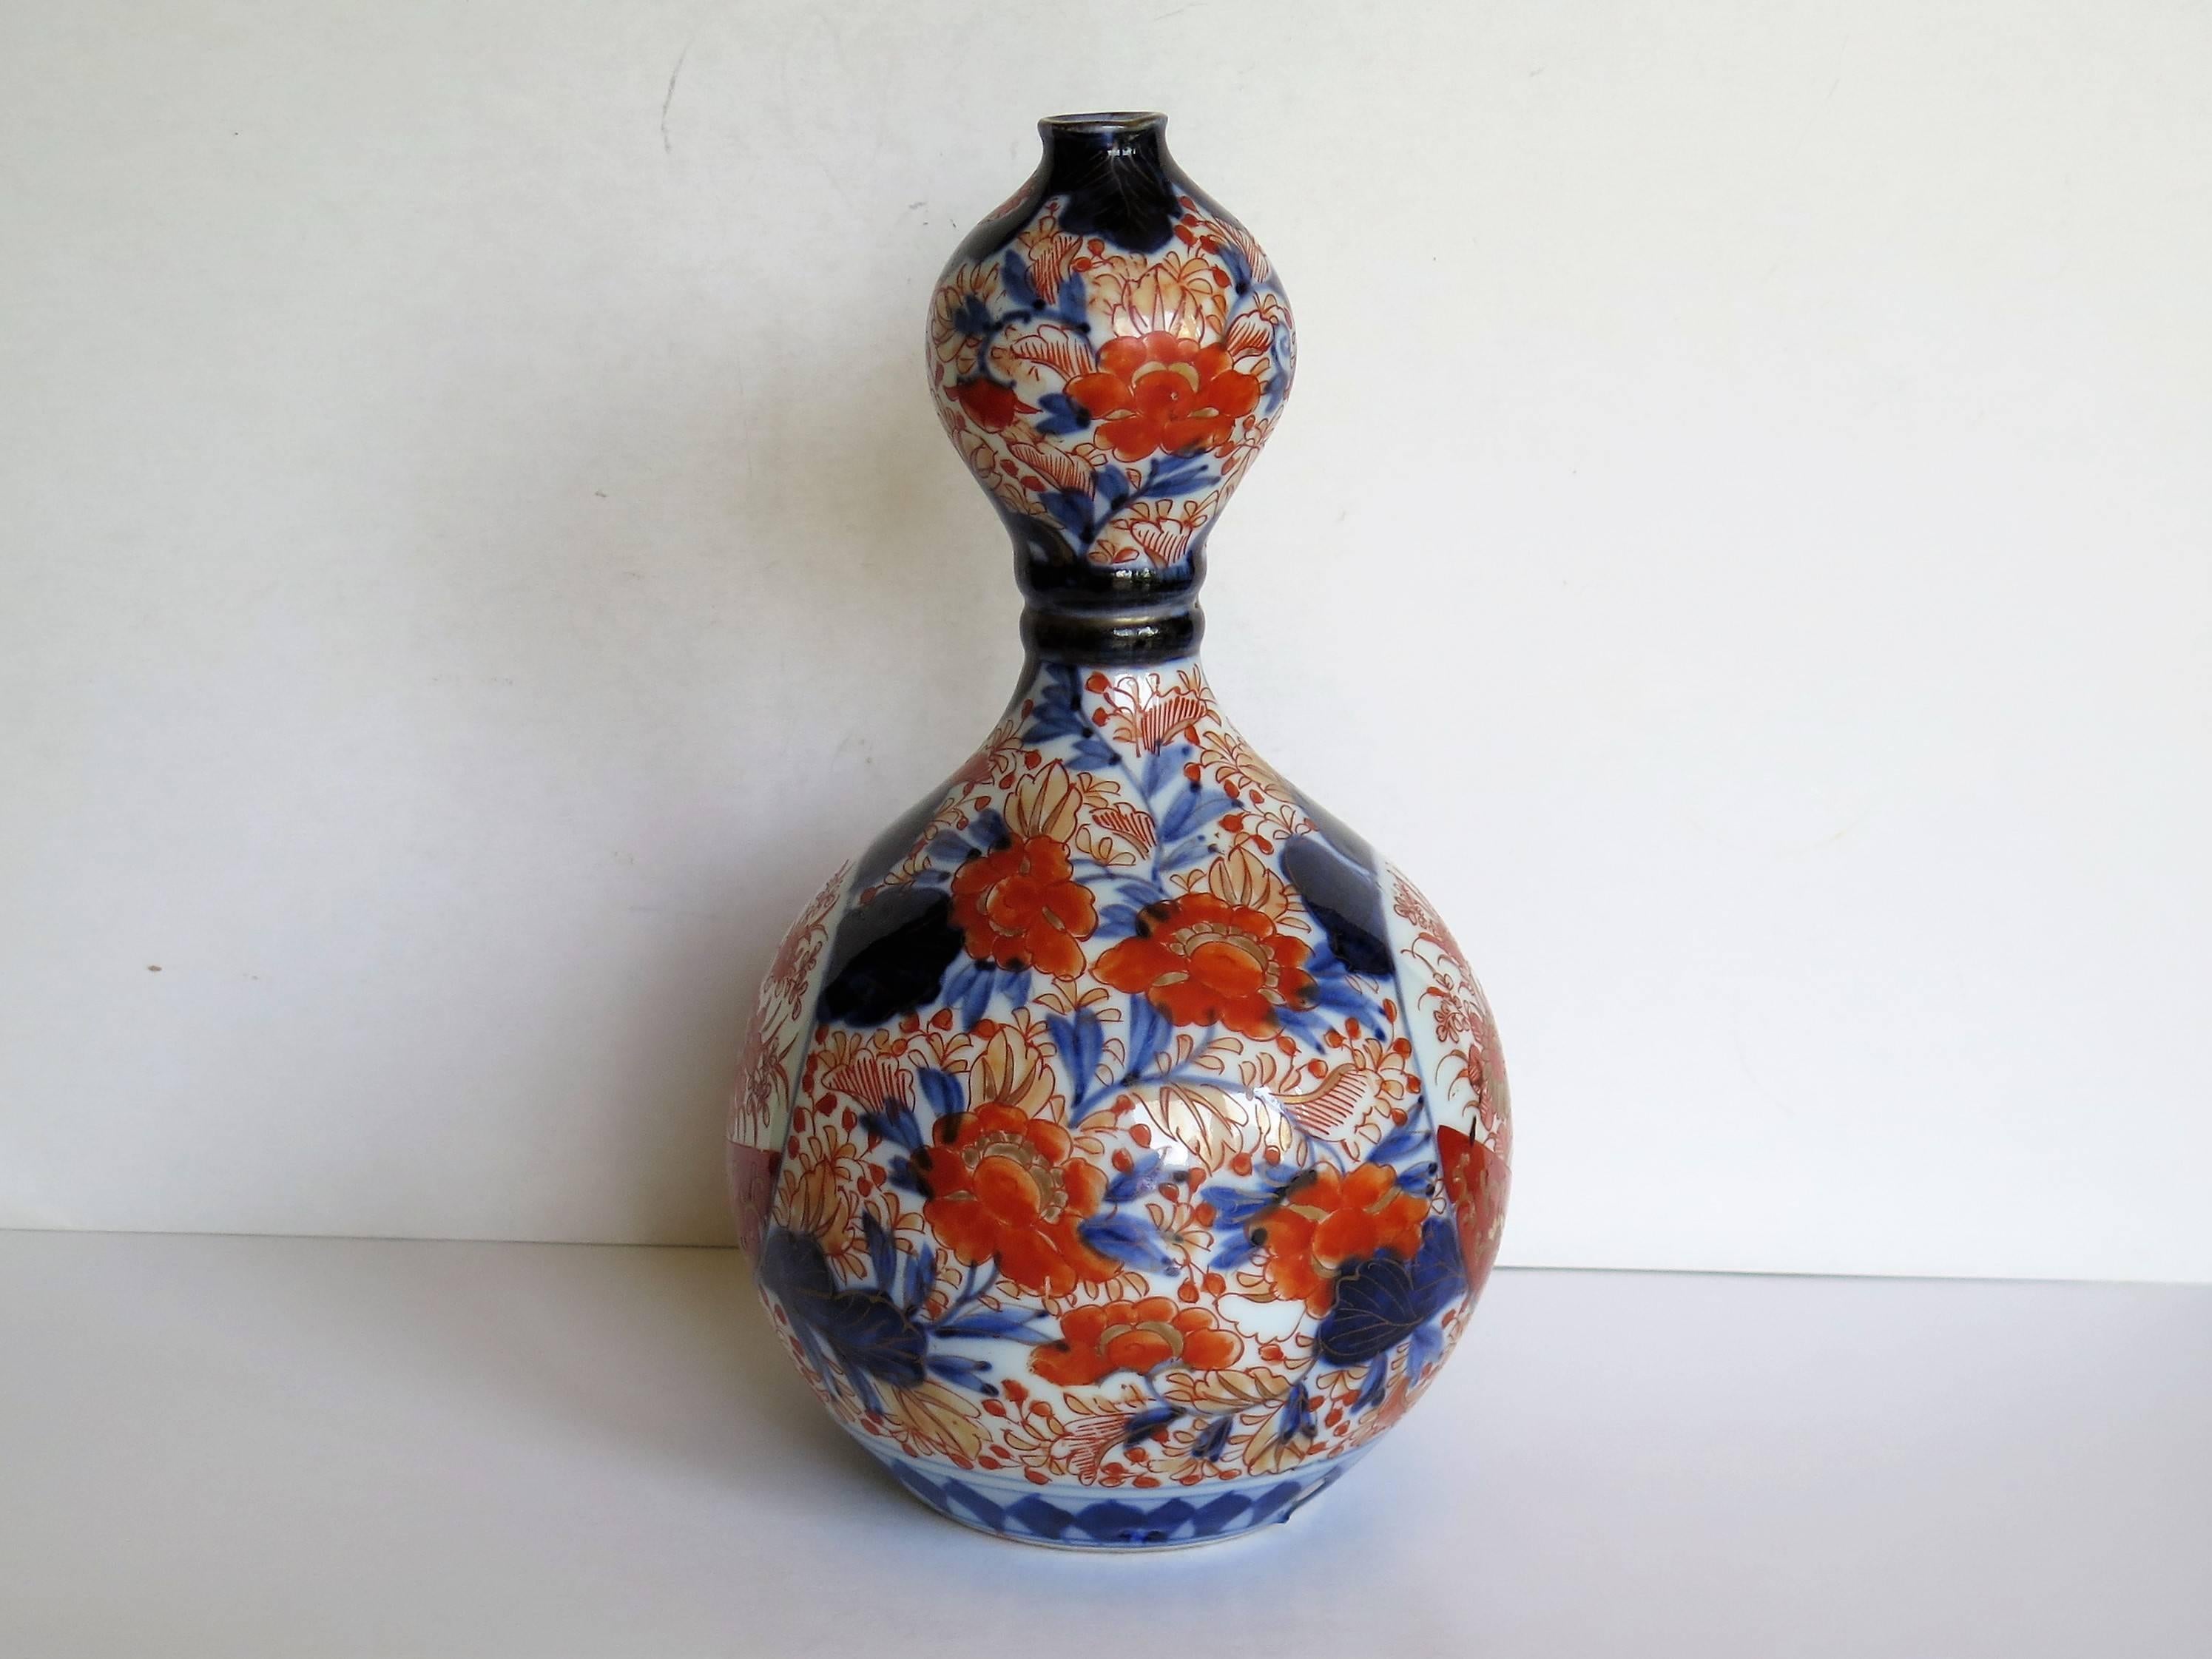 This is a very decorative Japanese Vase which we date to the ealy Meiji period of the 19th Century, circa 1870, but could be earlier in the 19th century.

This vase has a very distinctive and unusual Double Gourd, bulbous form, with a central ring